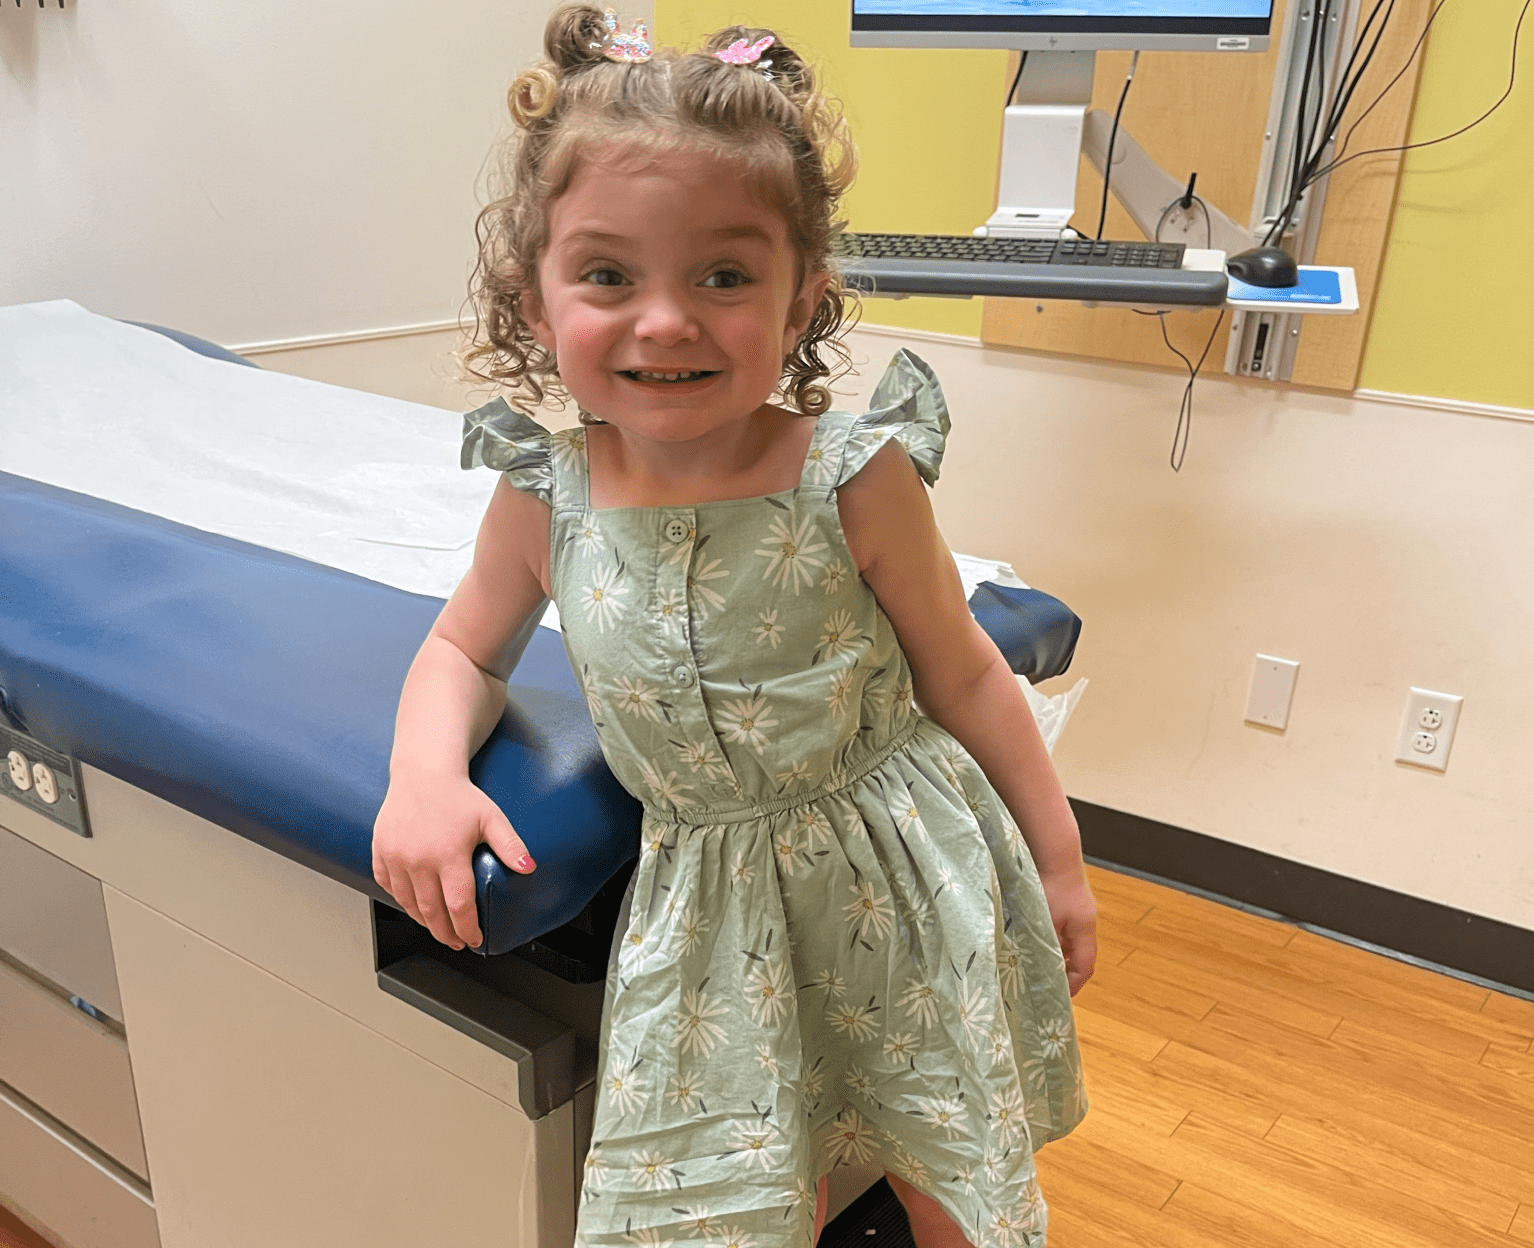 Little girl with Hurler syndrome in a doctor's office